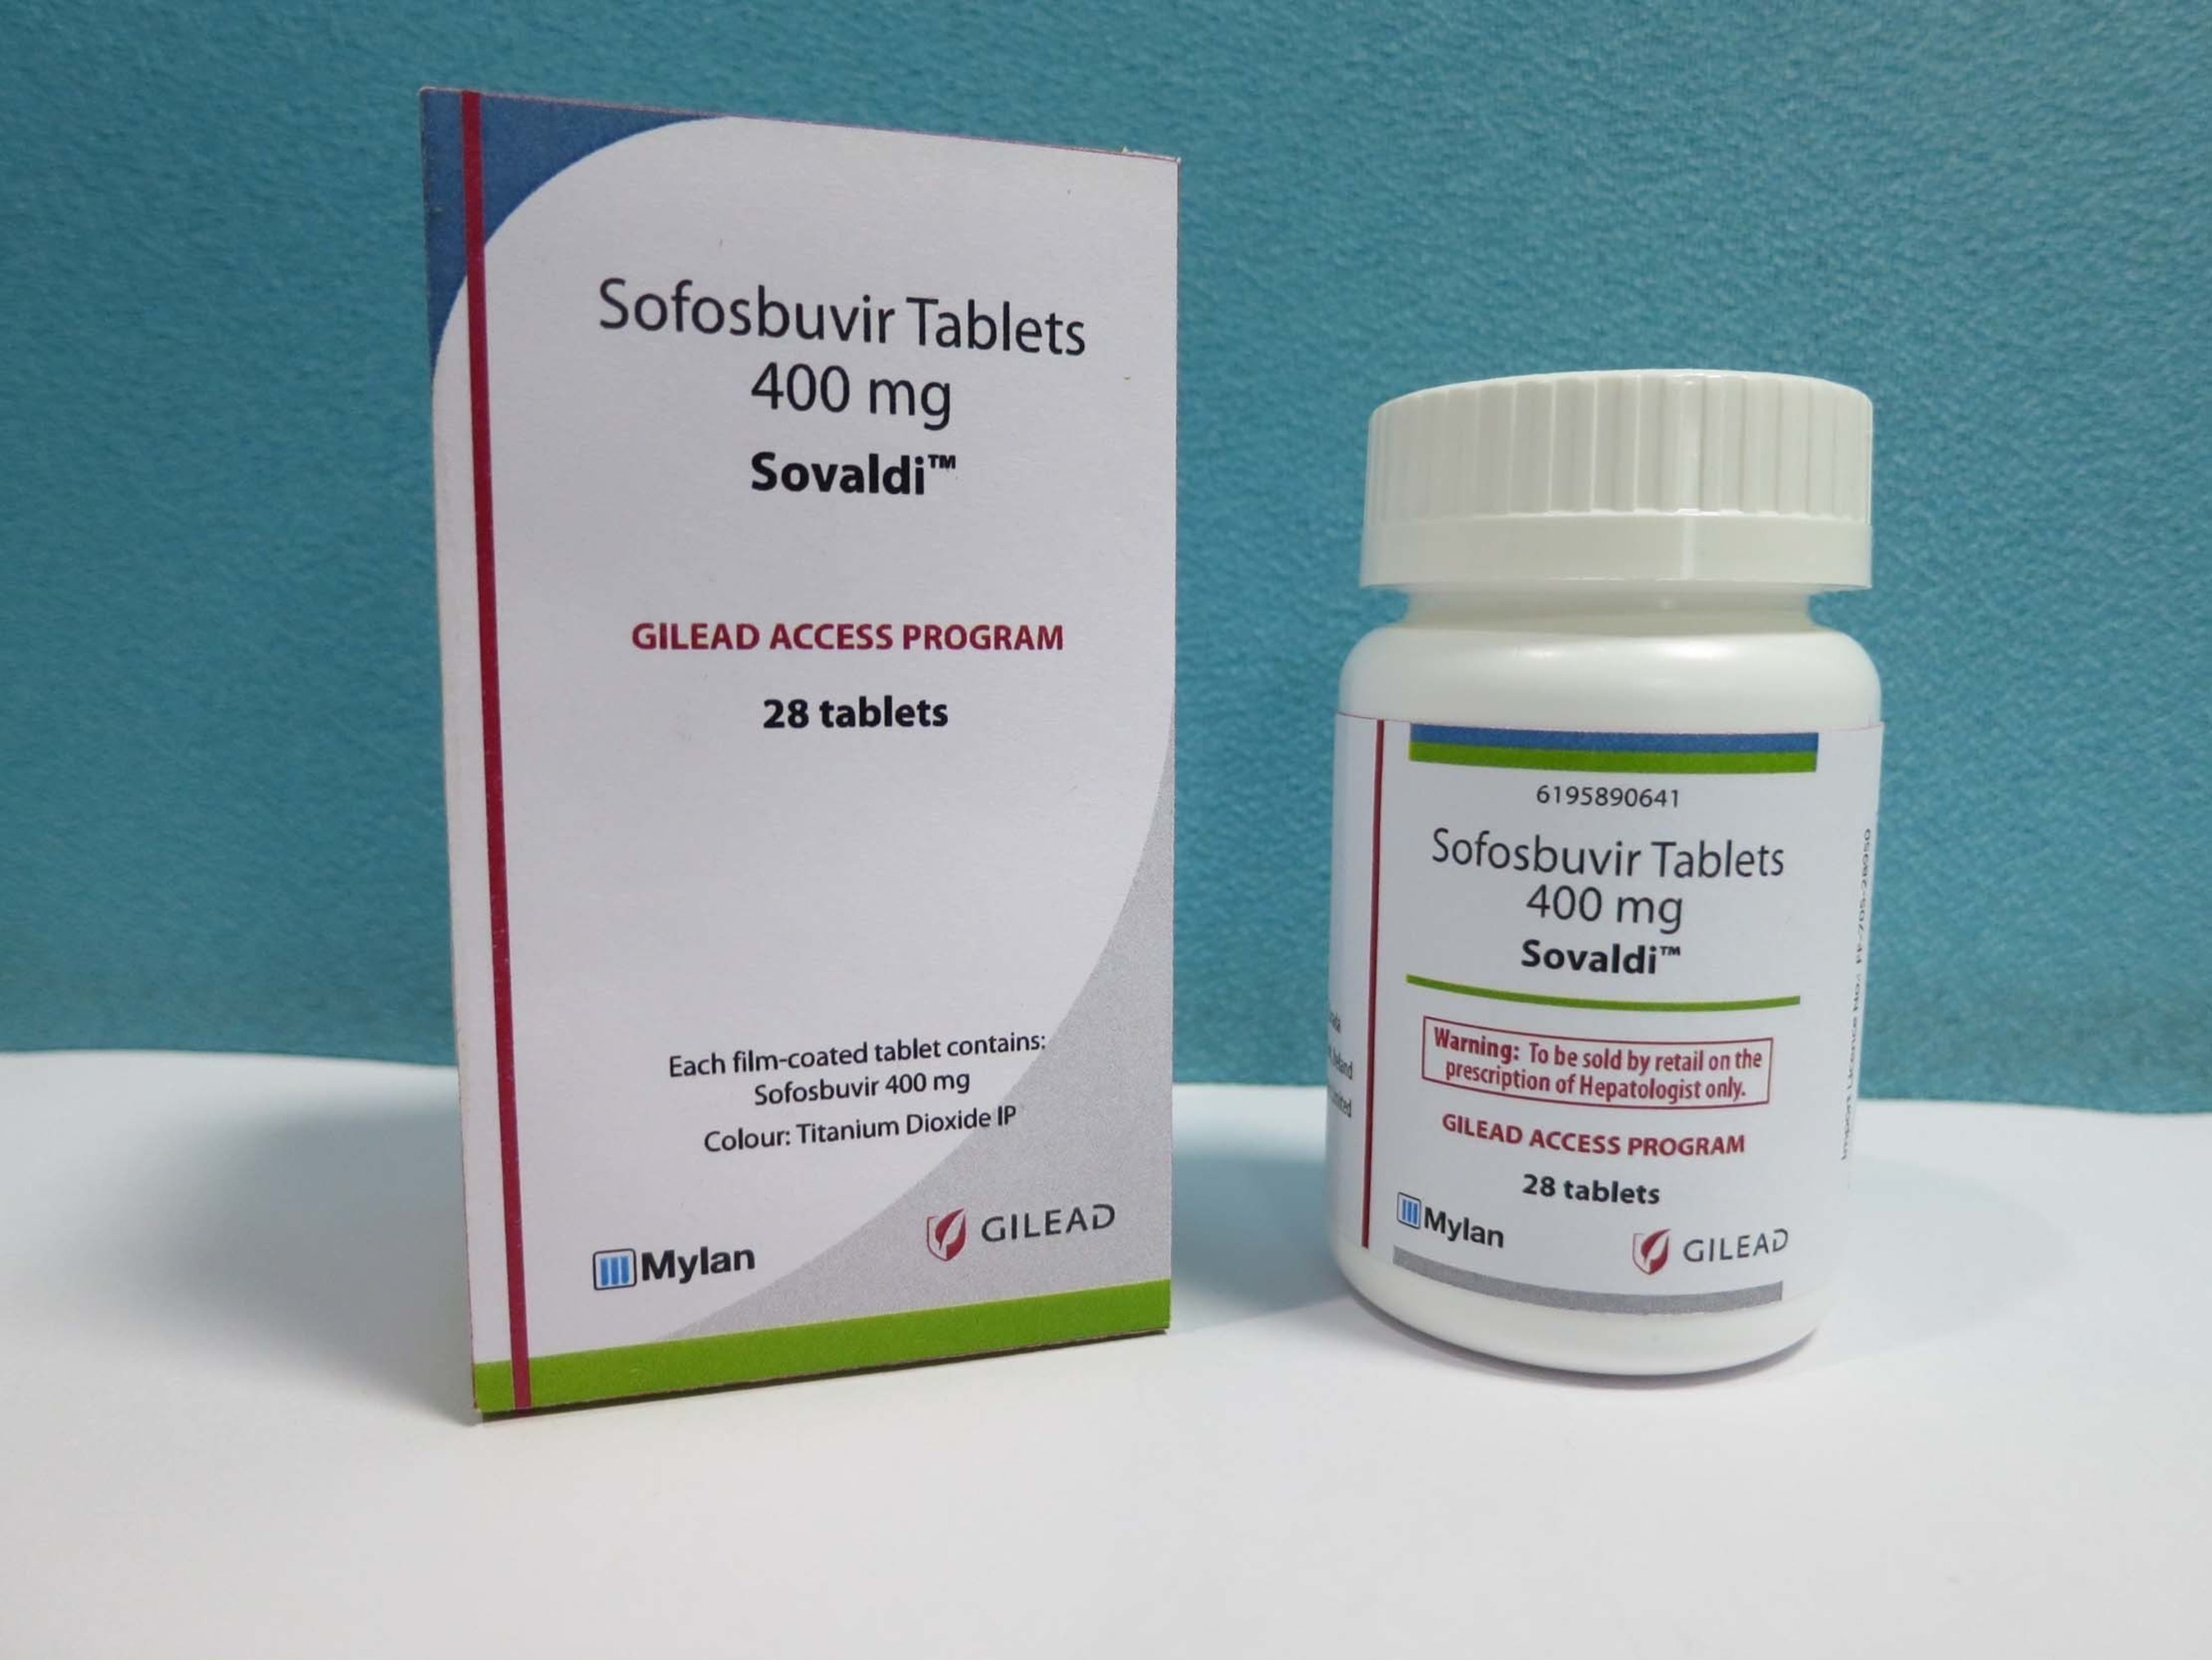 Mylan Launches Gilead Sciences' Sovaldi(R) Tablets in India